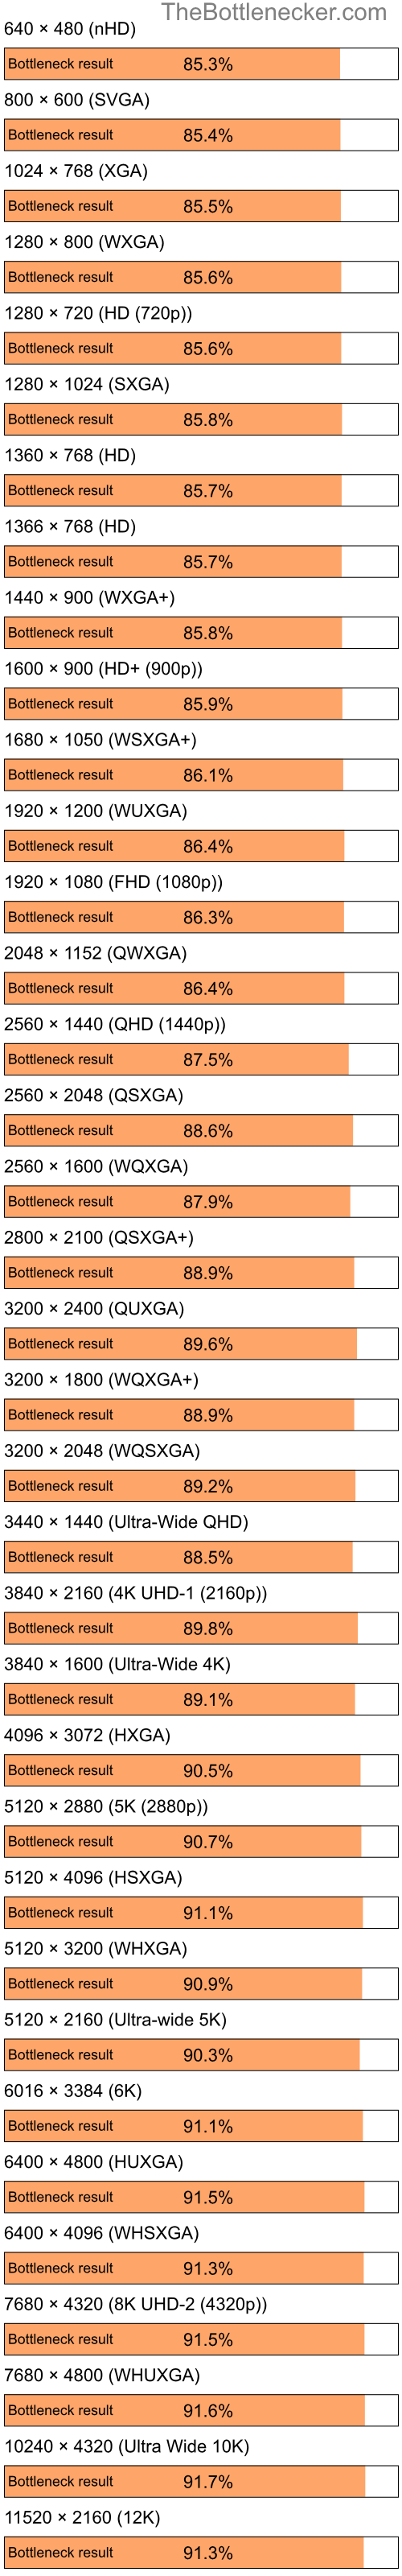 Bottleneck results by resolution for Intel Celeron and NVIDIA GeForce Go 6150 in Graphic Card Intense Tasks